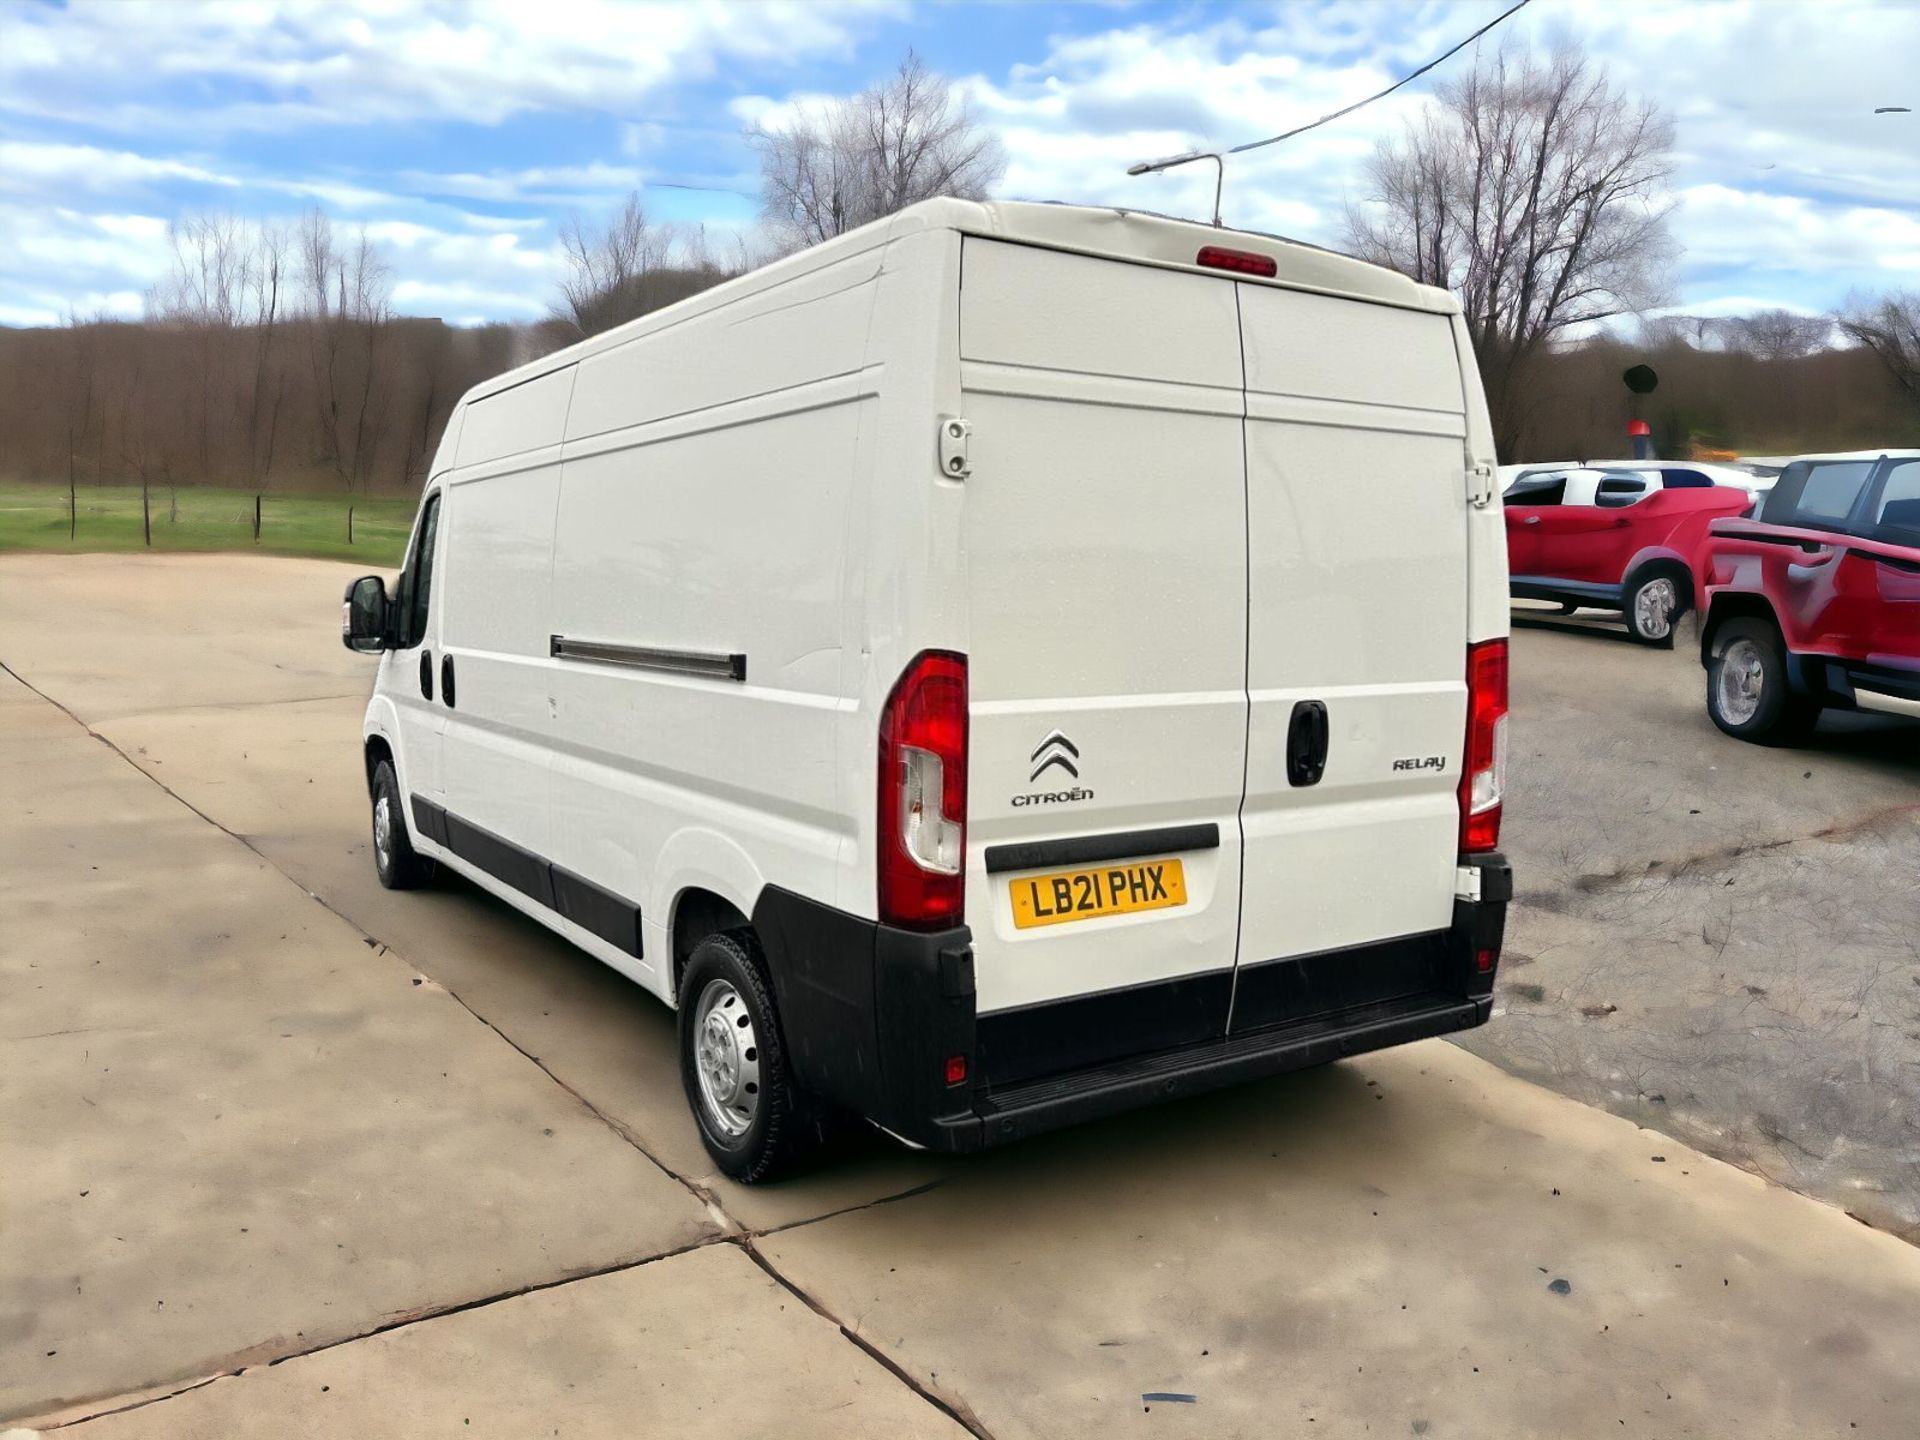 2021-21 REG CITROEN RELAY 35 L3H2 BHDI -HPI CLEAR - READY FOR WORK! - Image 6 of 13